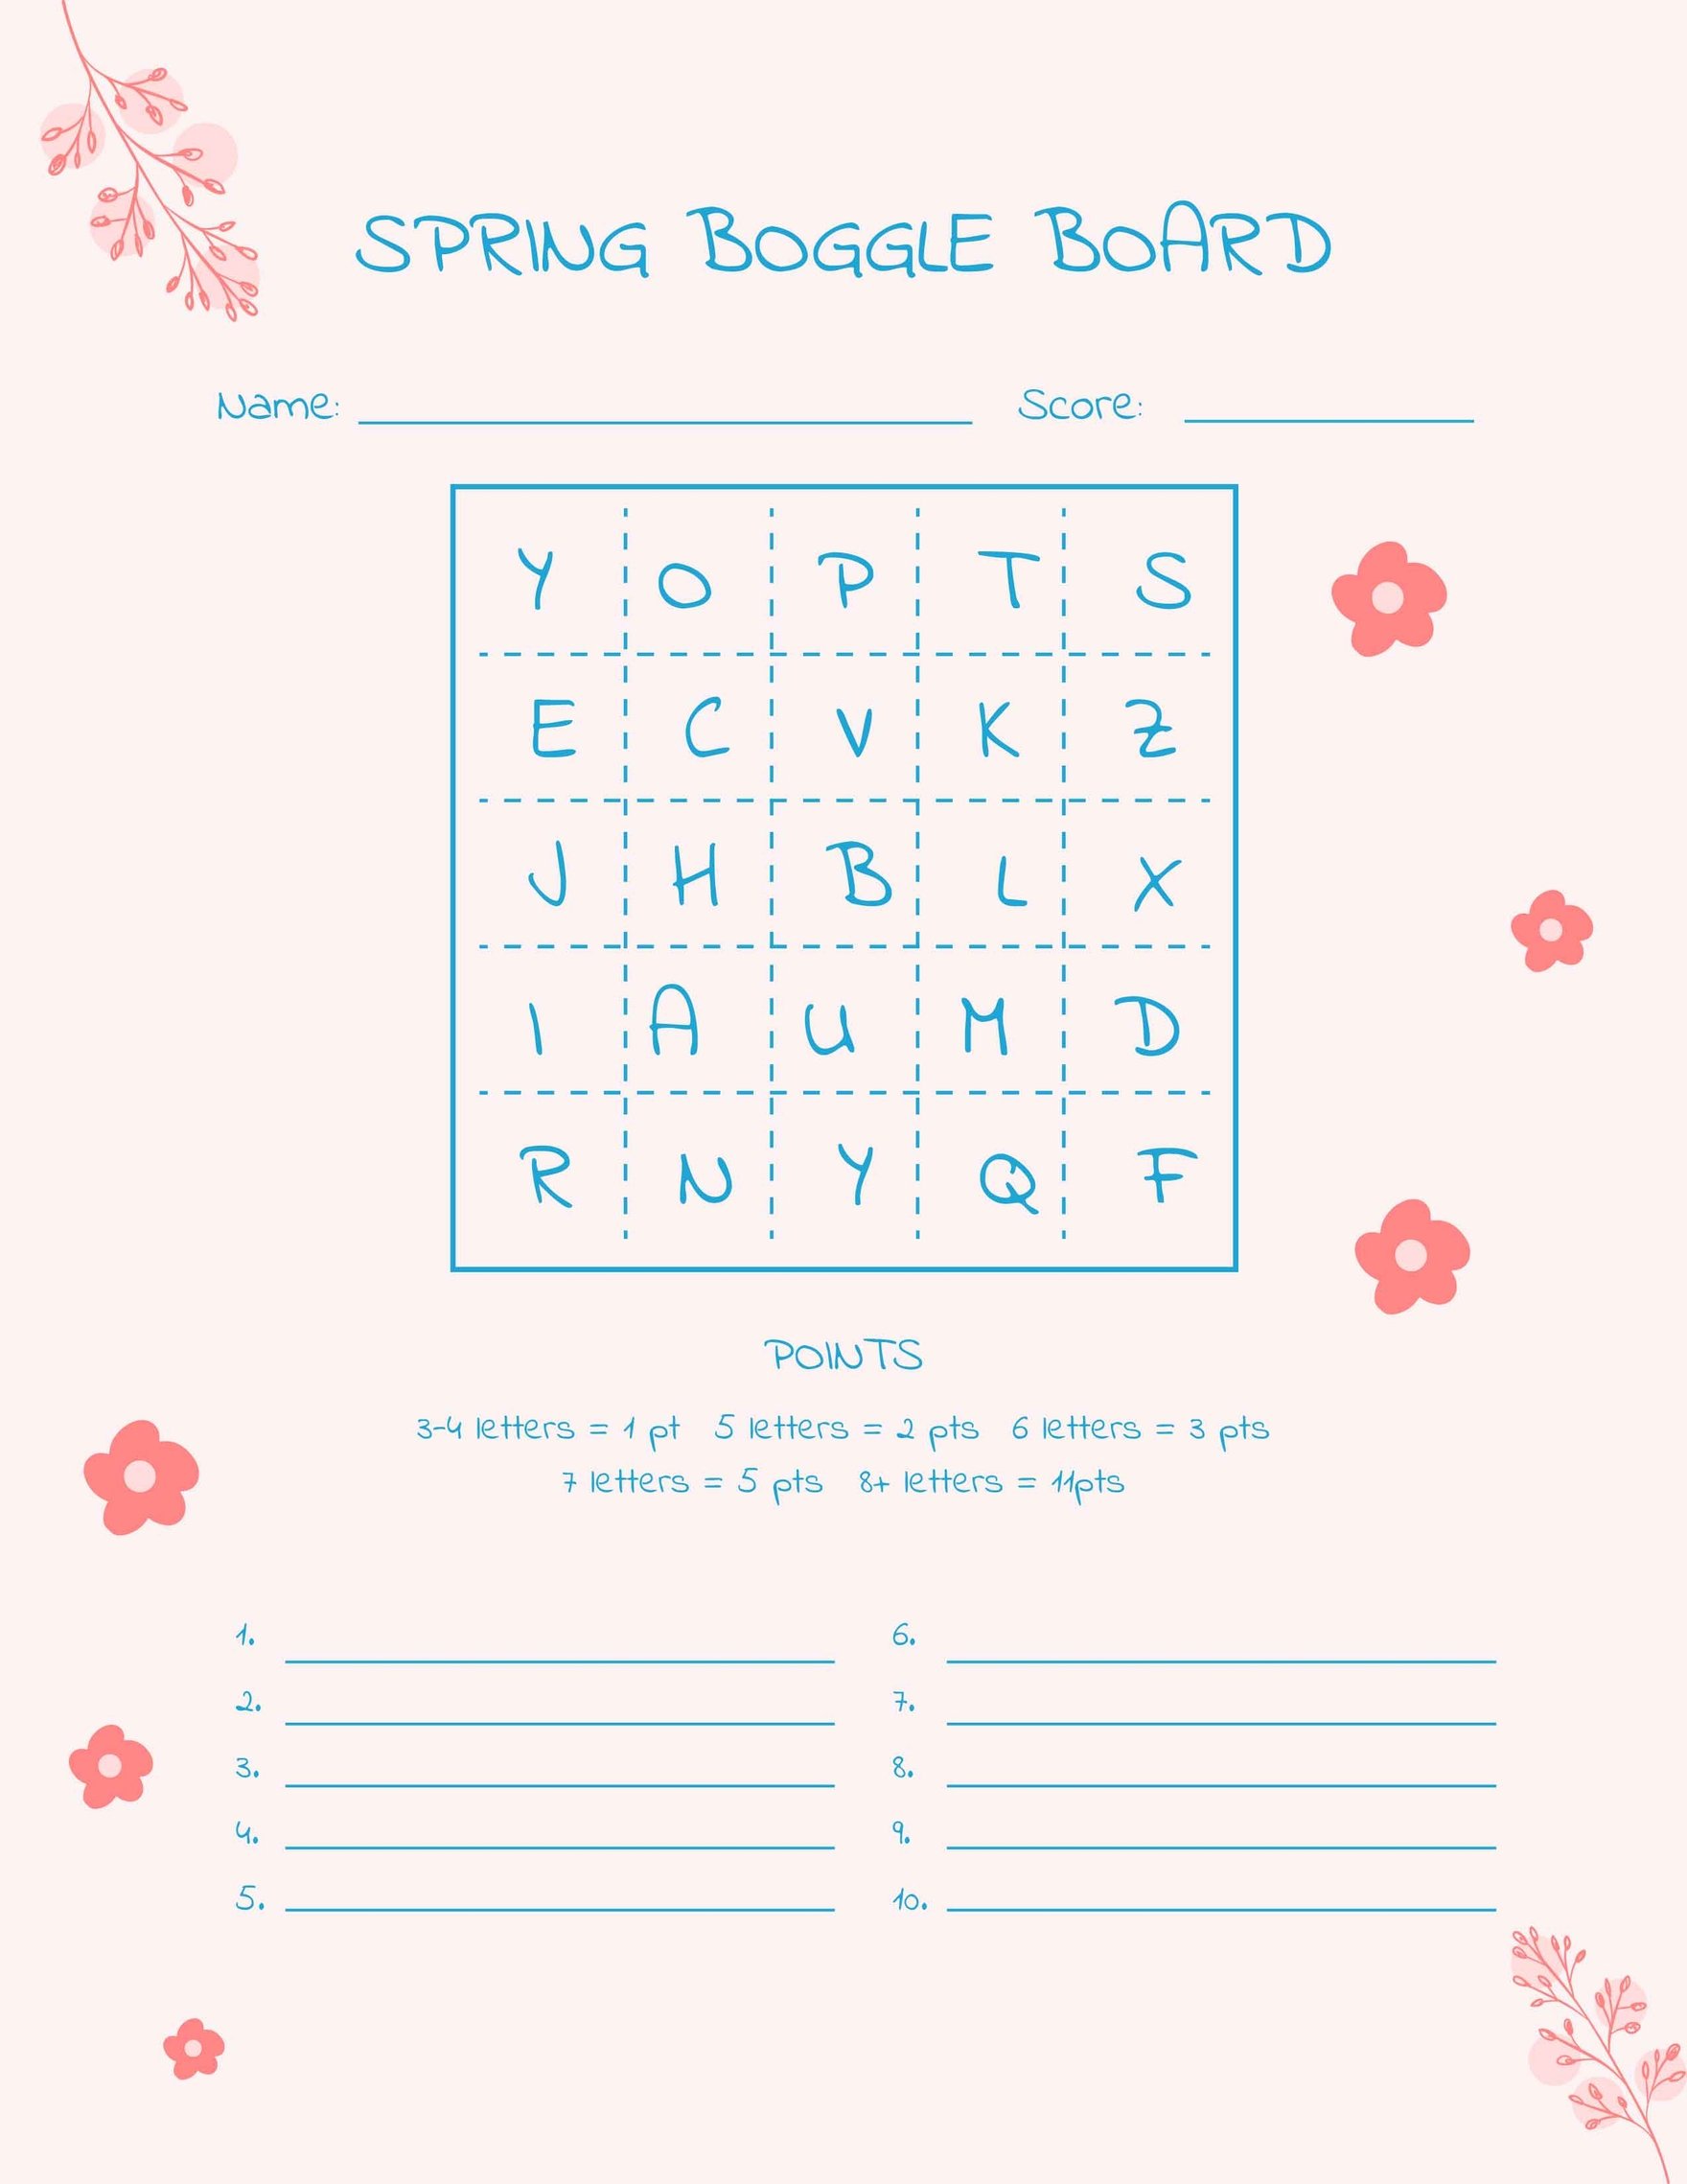 Spring Boggle Board Template